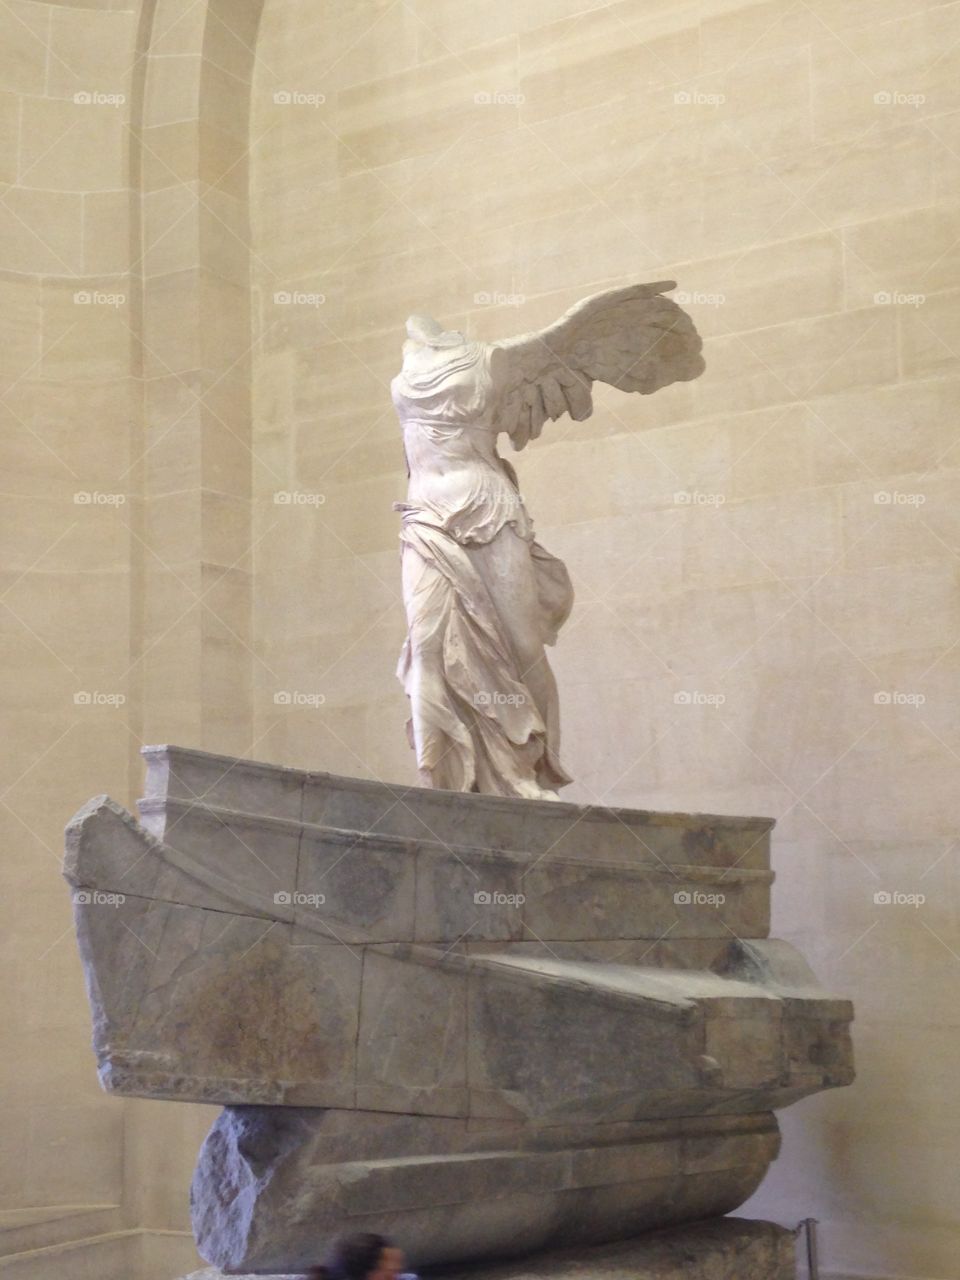 Winged Victory of Samothrace, also called te Nike of Samothrace is a marble sculpture of Nike, the Greek goddess of victory. Located at the Louvre museum in Paris. 